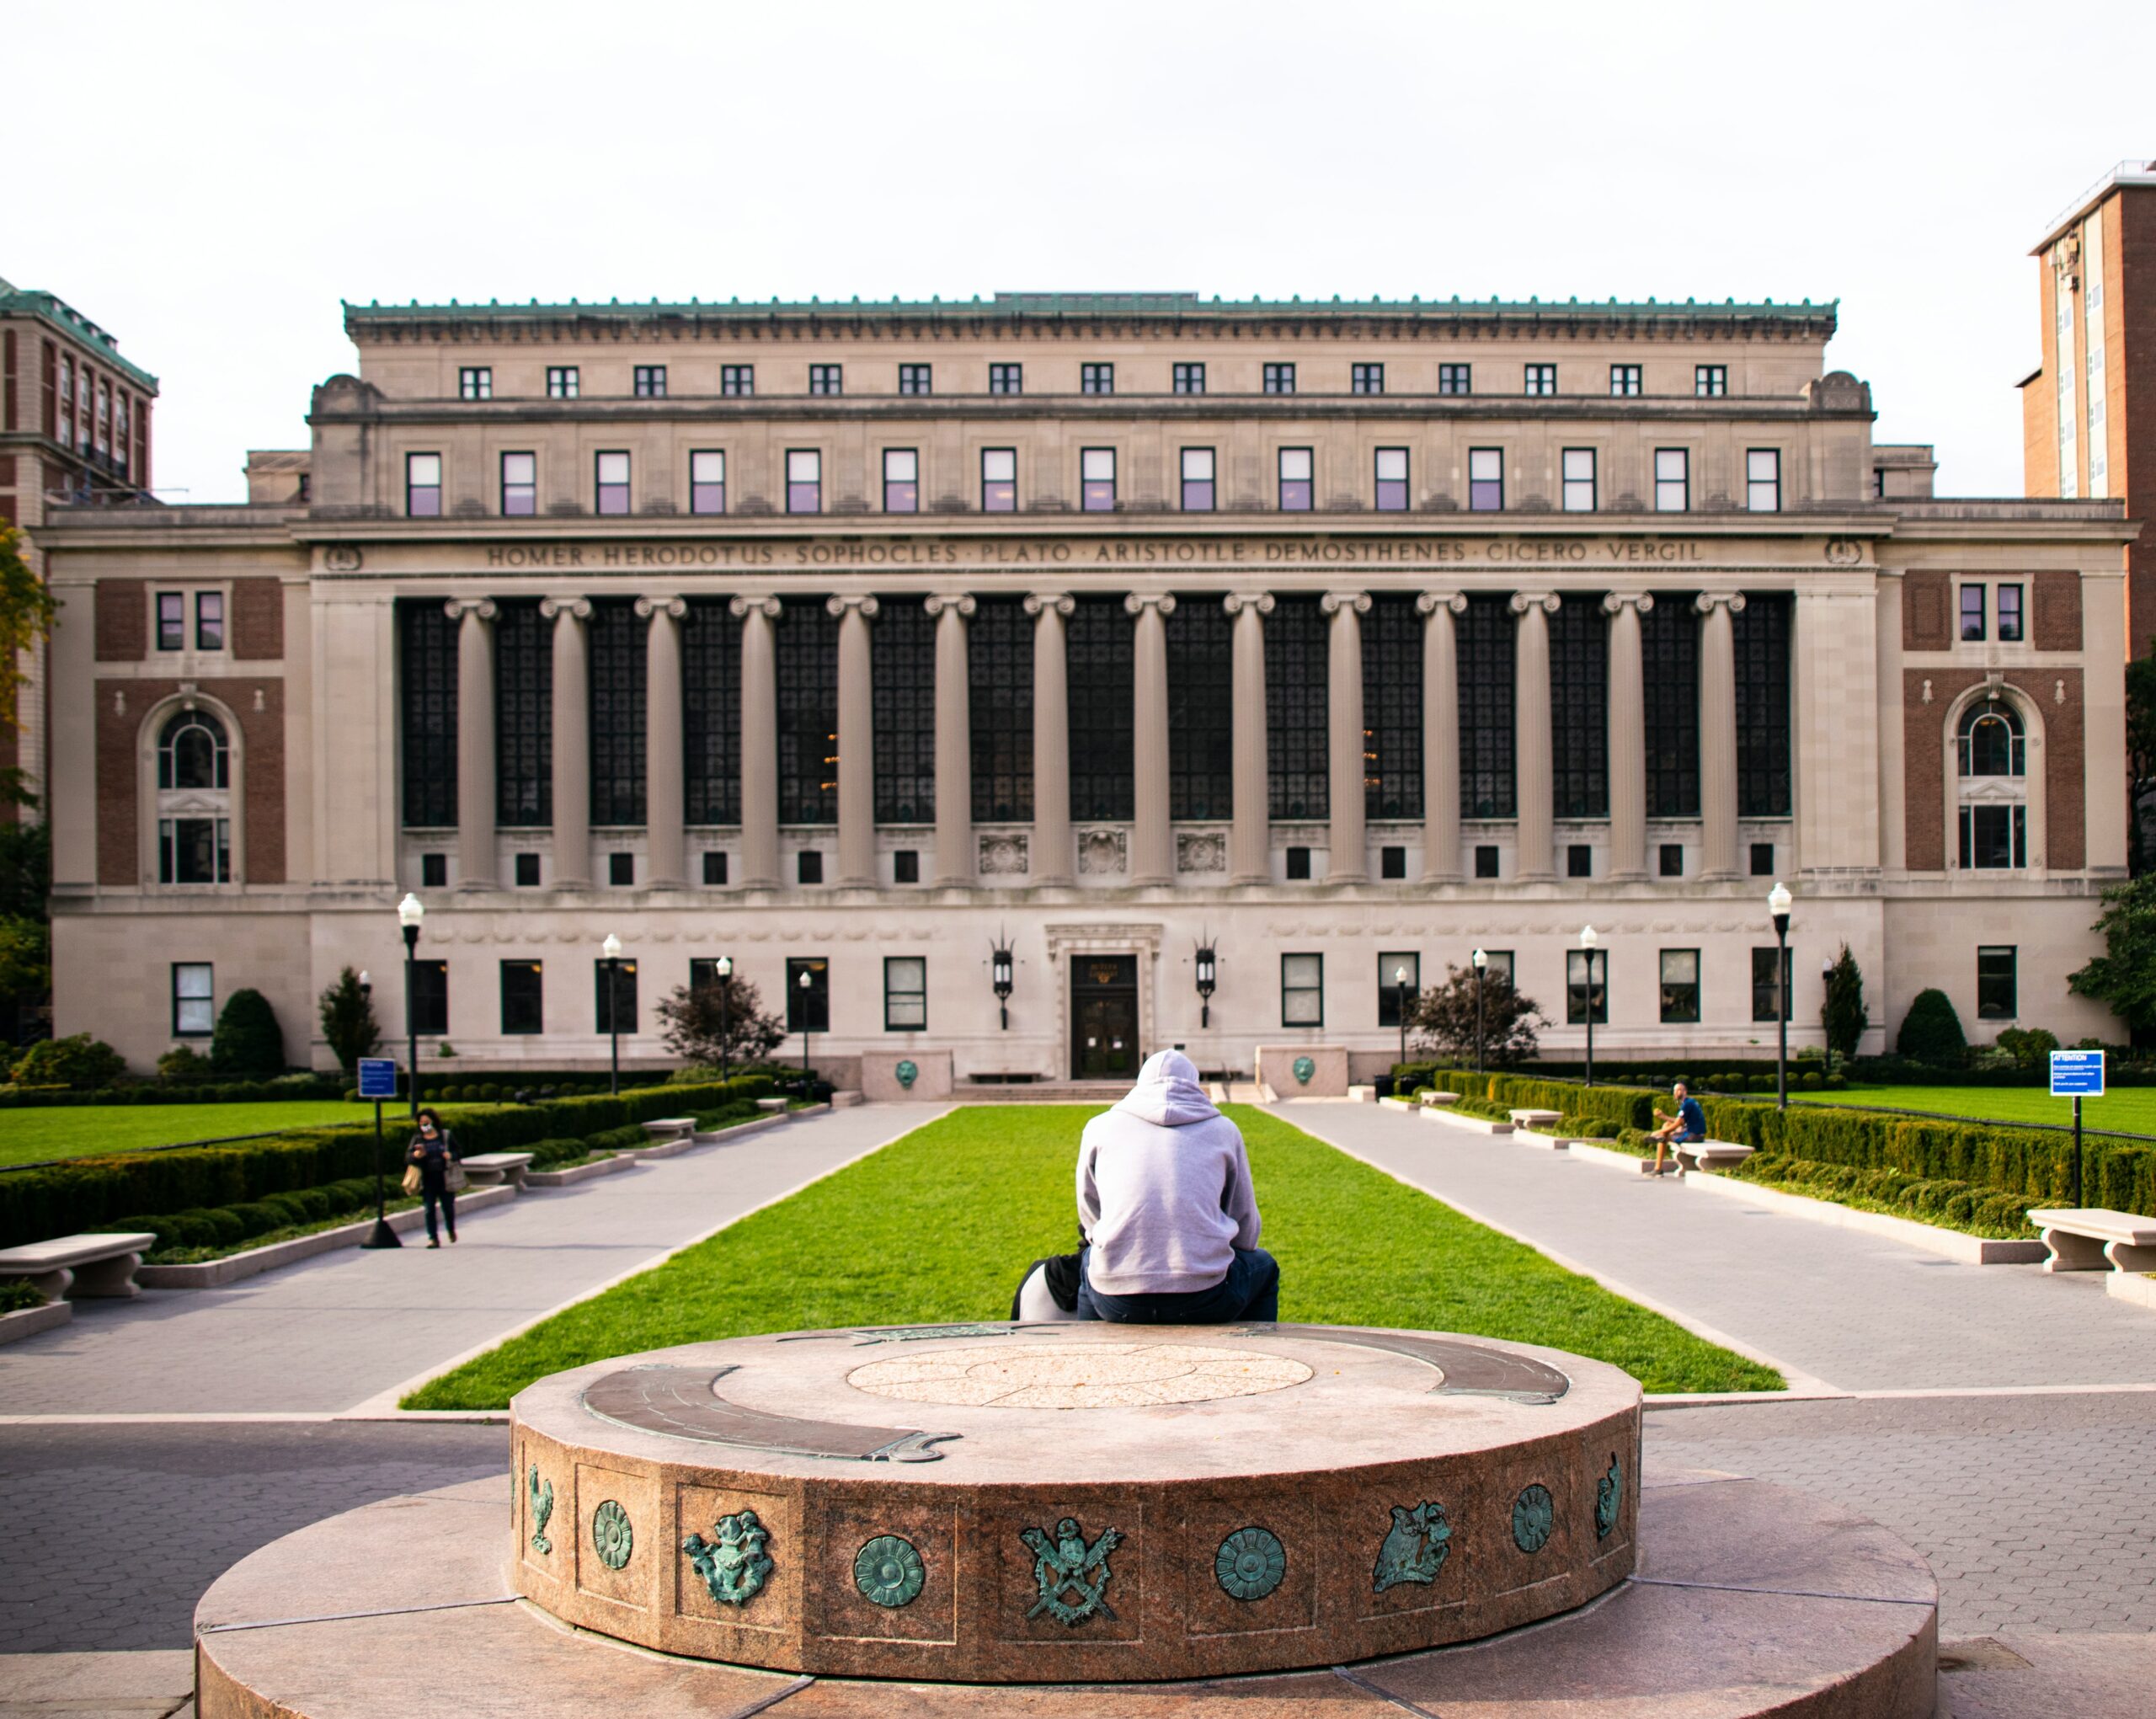 Columbia University Online Acceptance Rate – CollegeLearners.com